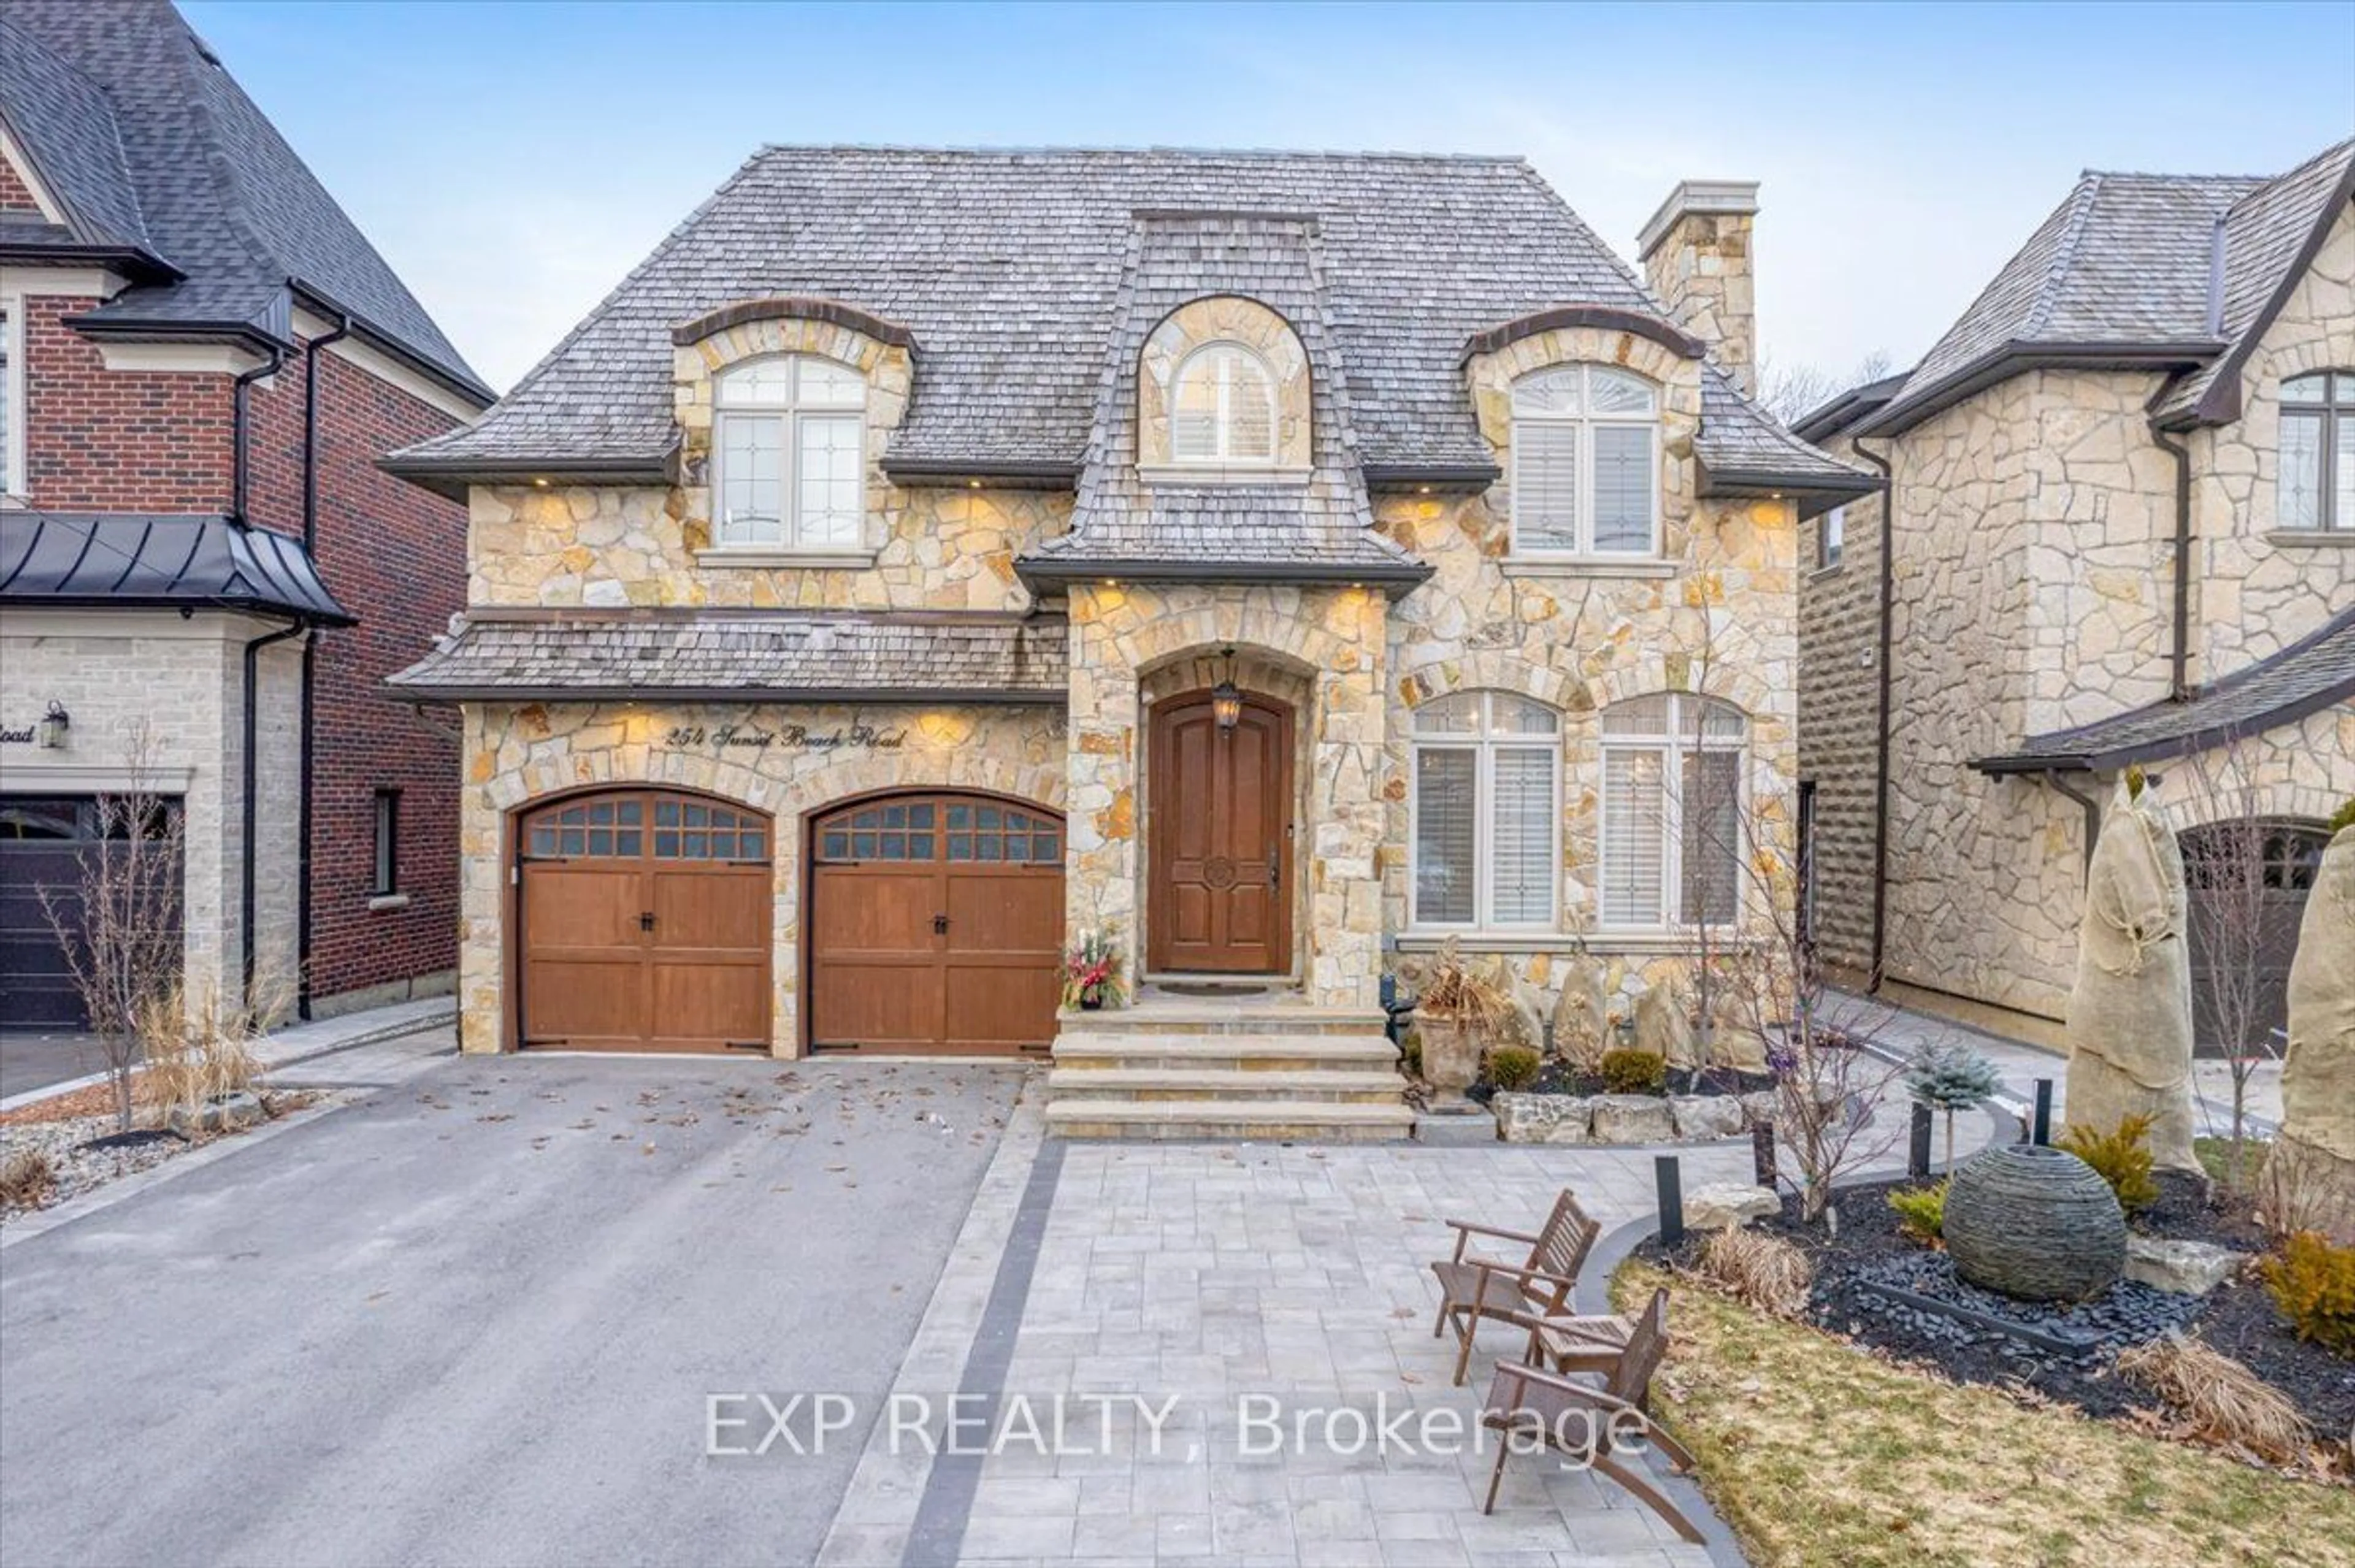 Home with stone exterior material for 254 Sunset Beach Rd, Richmond Hill Ontario L4E 3H3